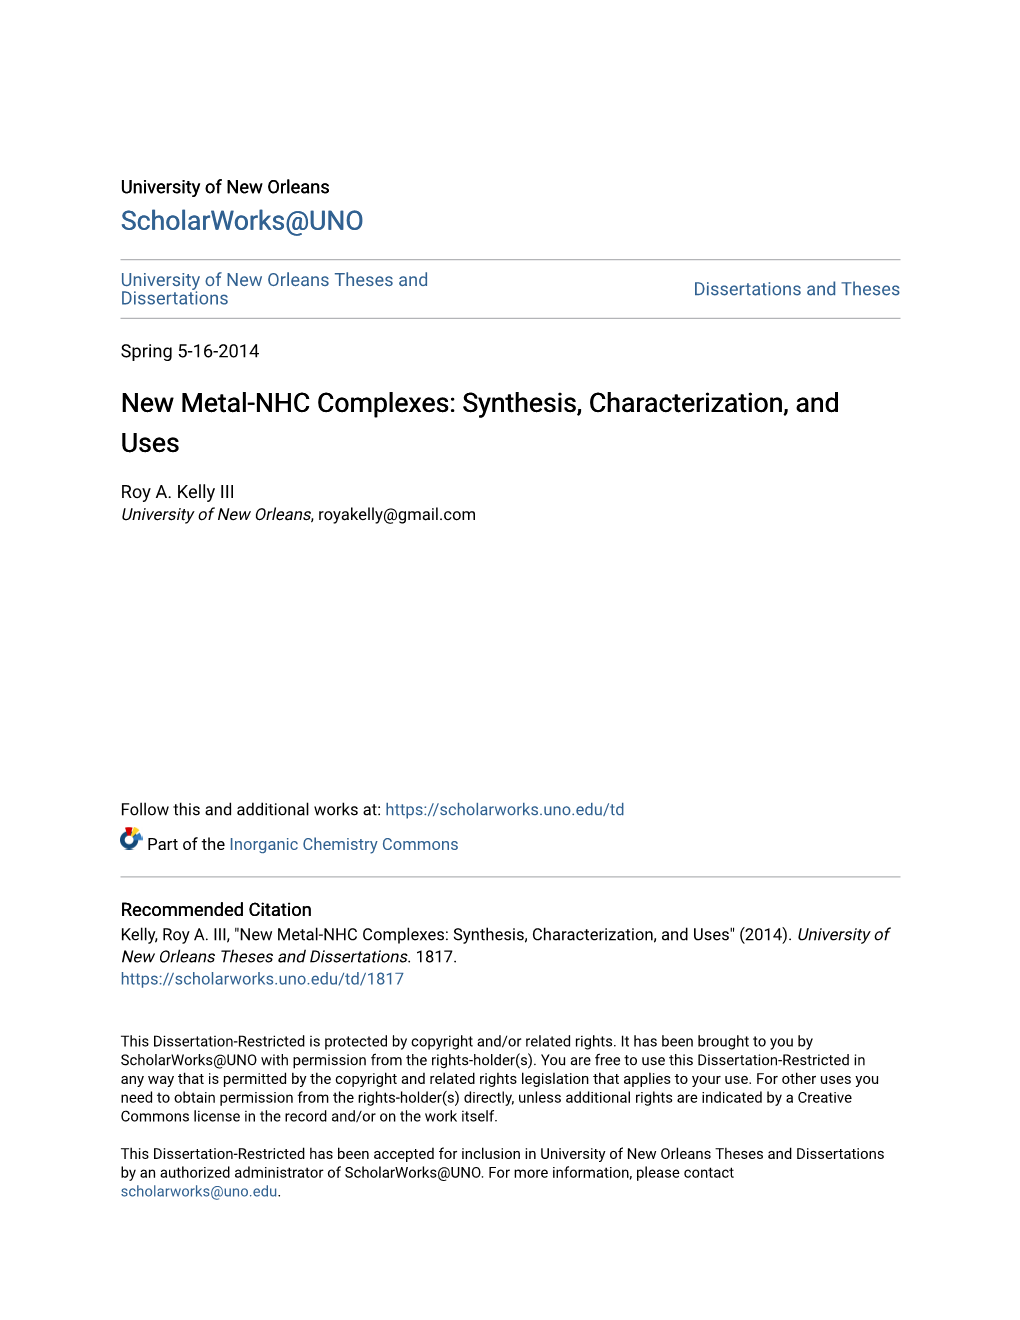 New Metal-NHC Complexes: Synthesis, Characterization, and Uses